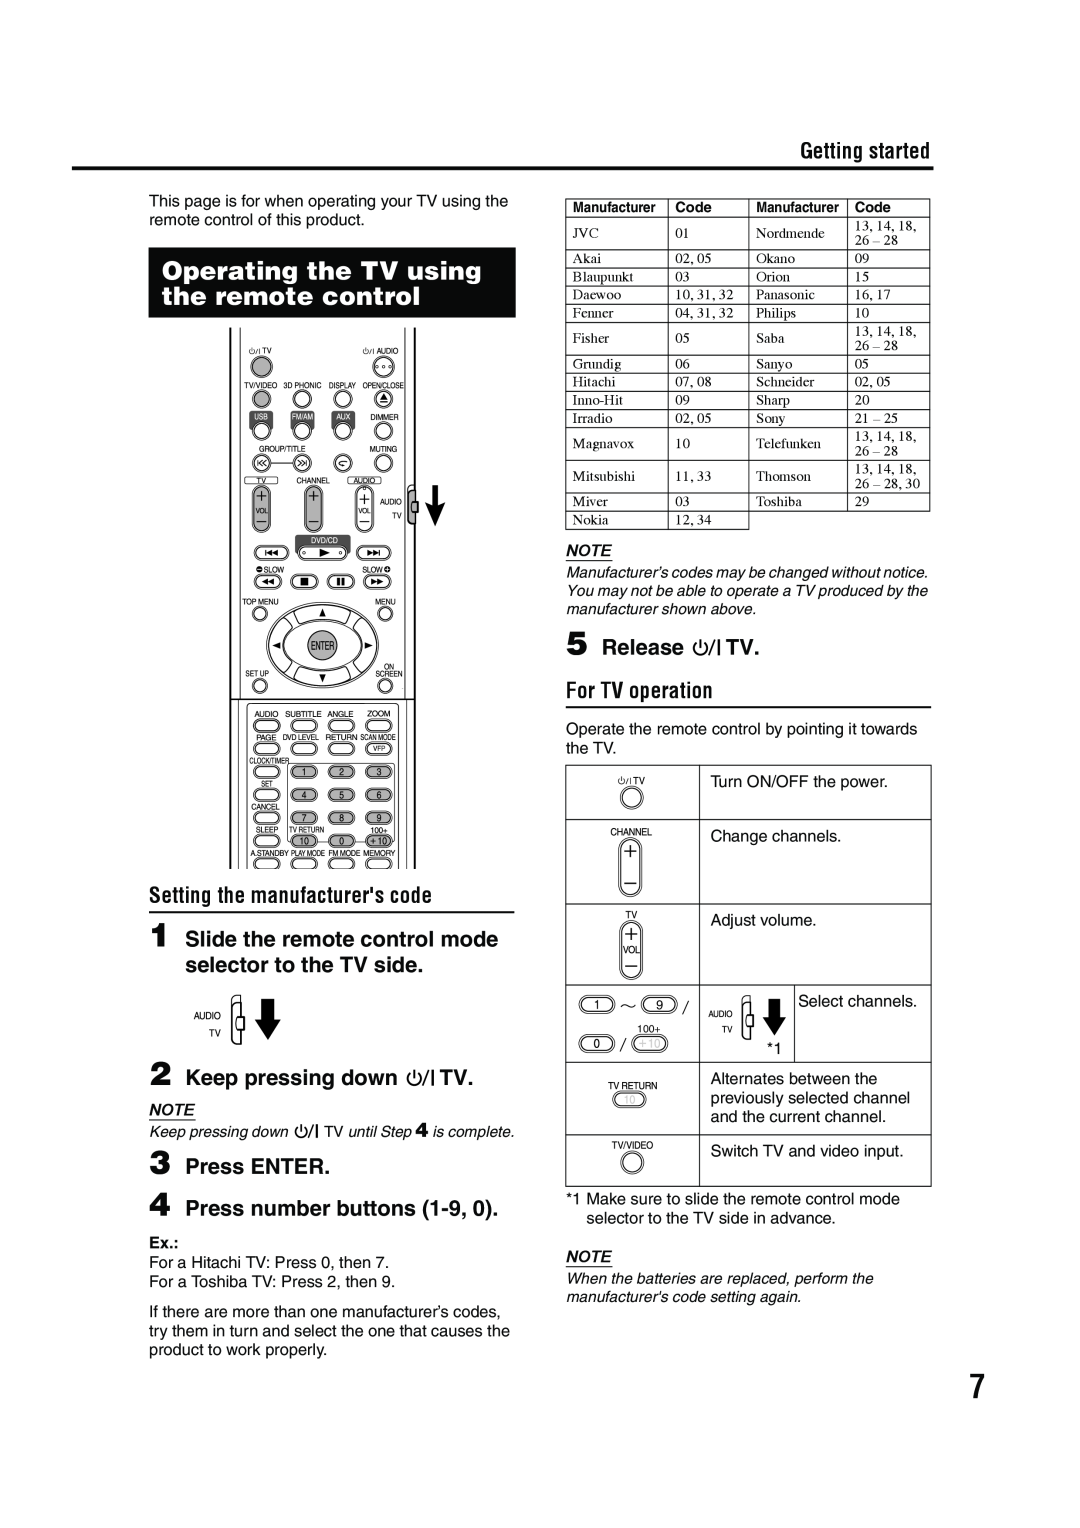 JVC GVT0143-008A manual Operating the TV using the remote control, Setting the manufacturers code, Keep pressing down TV 